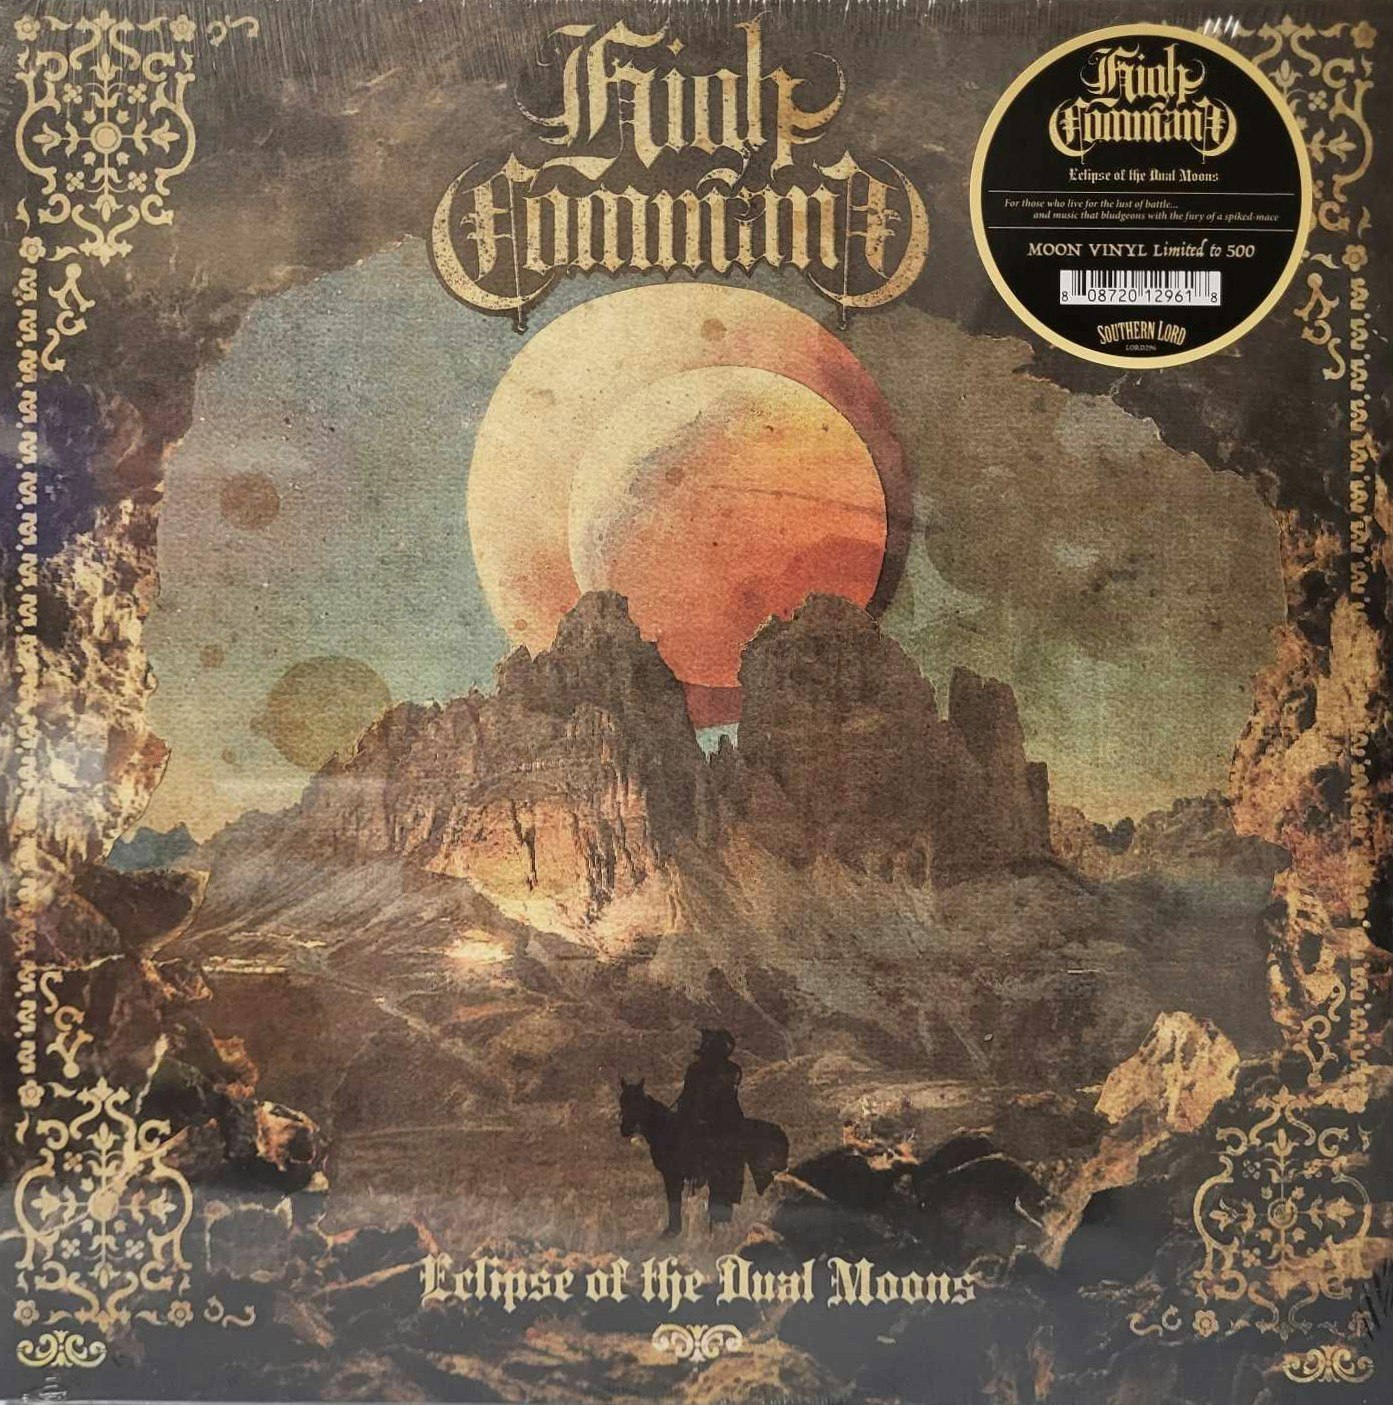 HIGH COMMAND -ECLIPSE OF THE DUAL MOONS